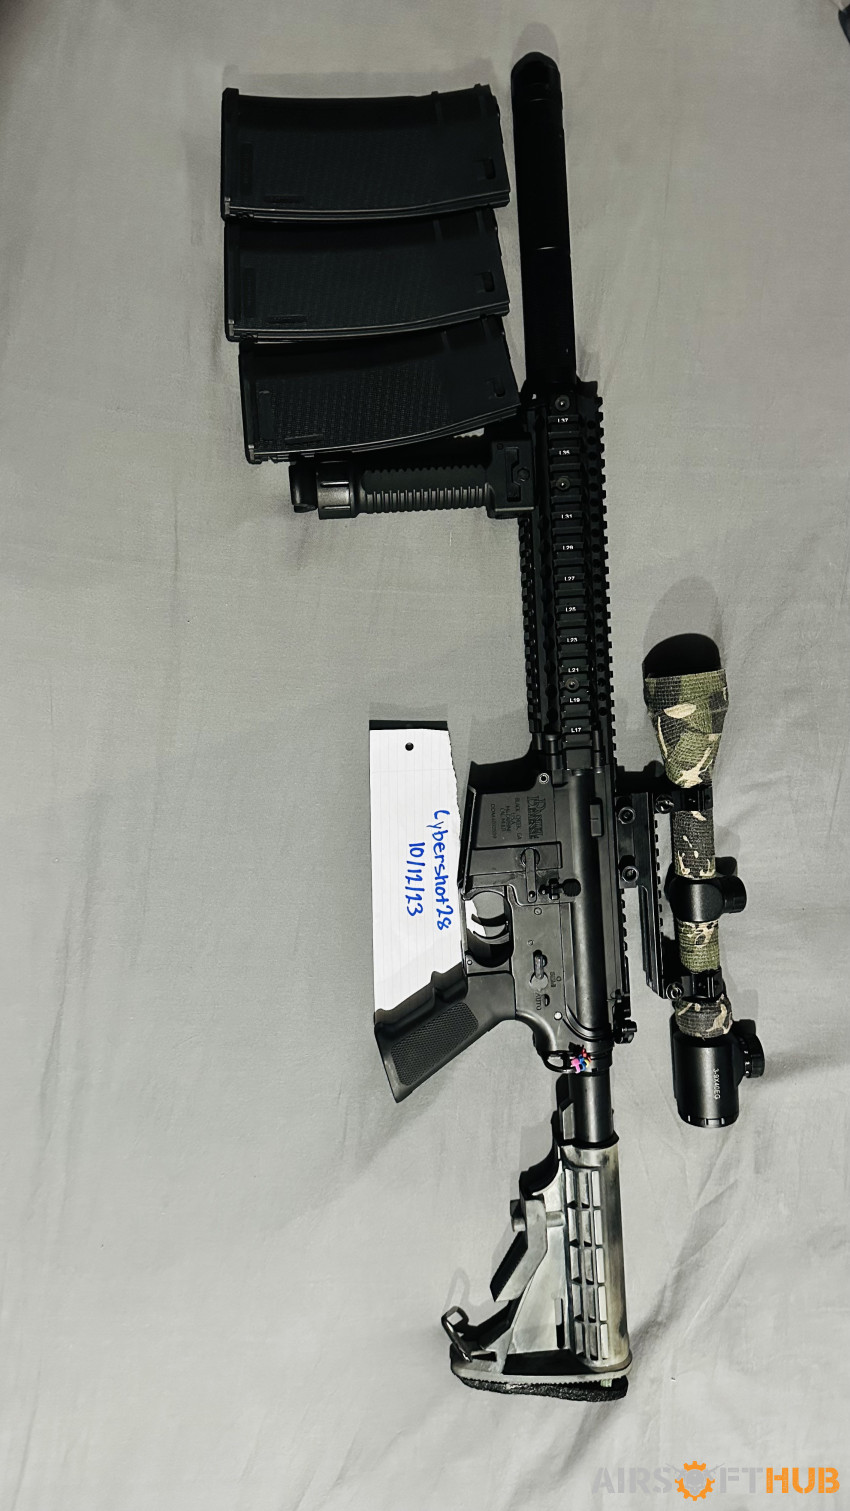 MK18 DMR - Used airsoft equipment